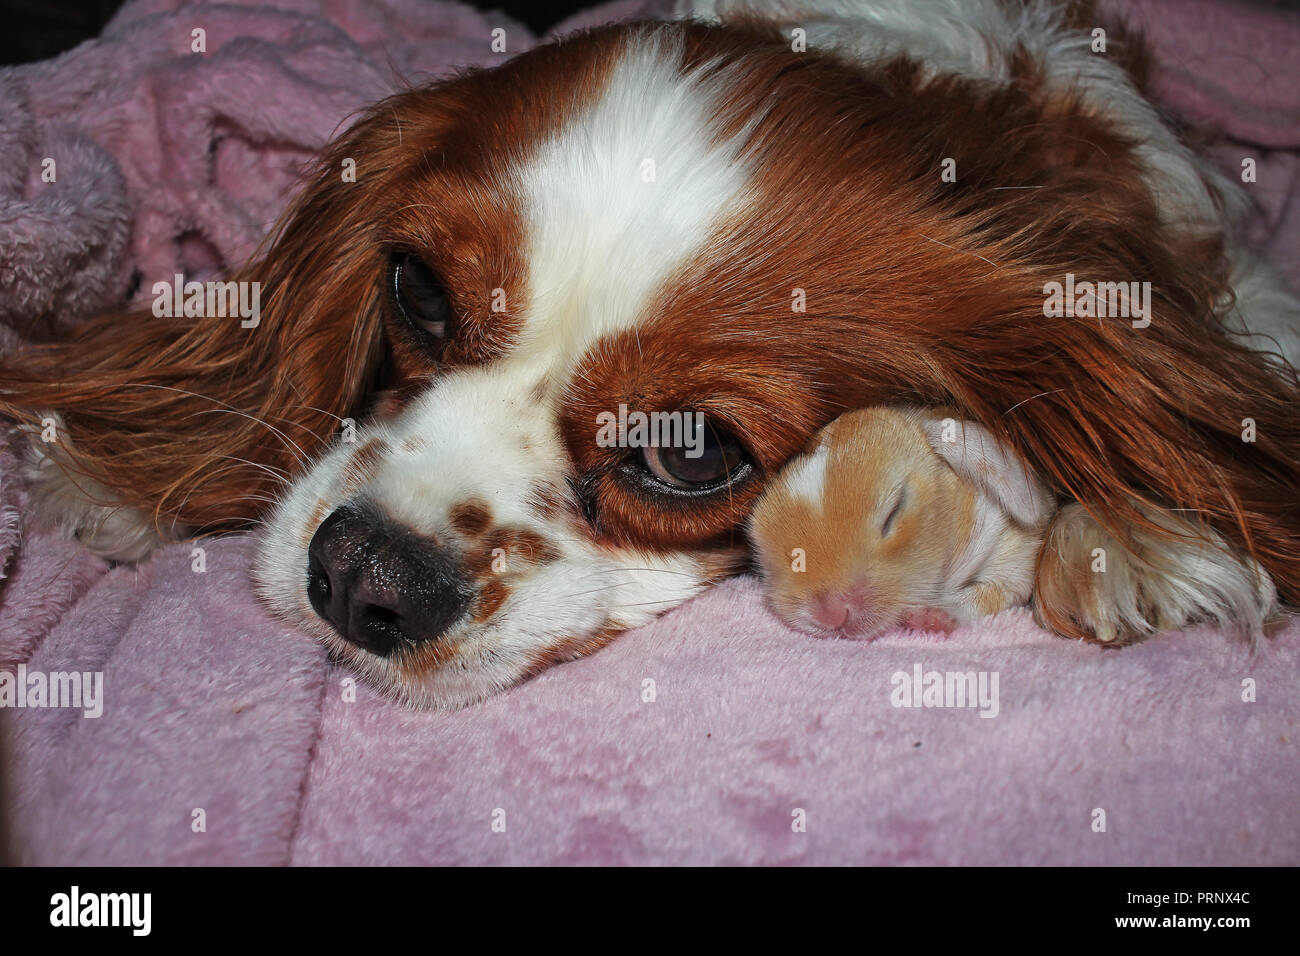 Dog and baby rabbit together. animal friendship. Cute animals pets. Stock Photo